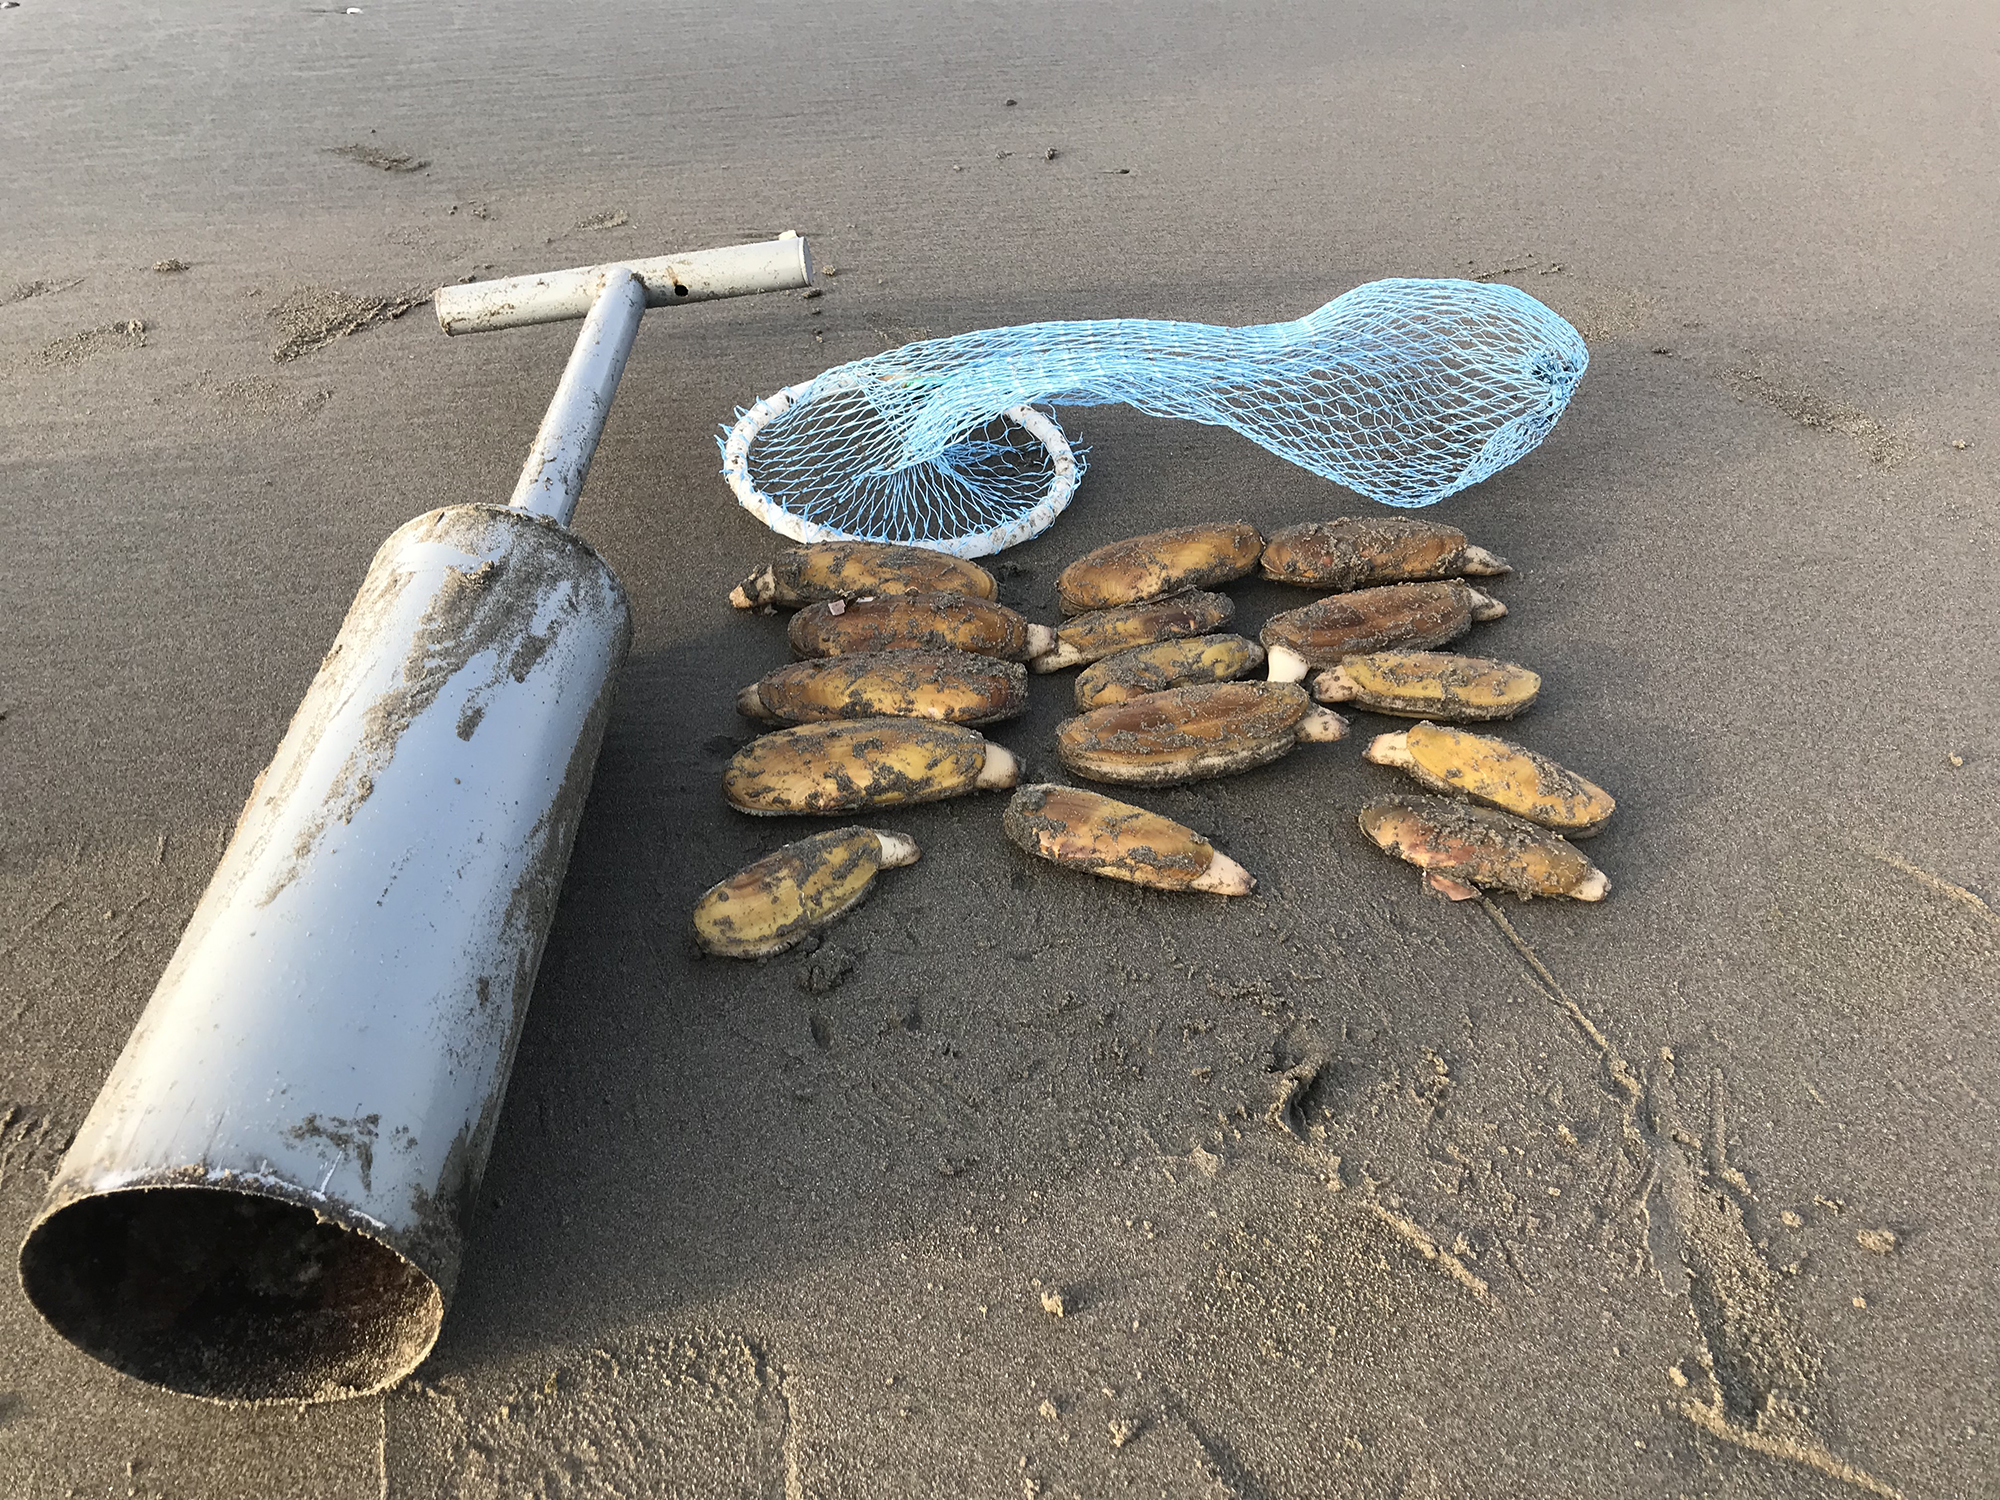 WDFW approves razor clam digging at Long Beach beginning Thursday, March 23  - The Columbian